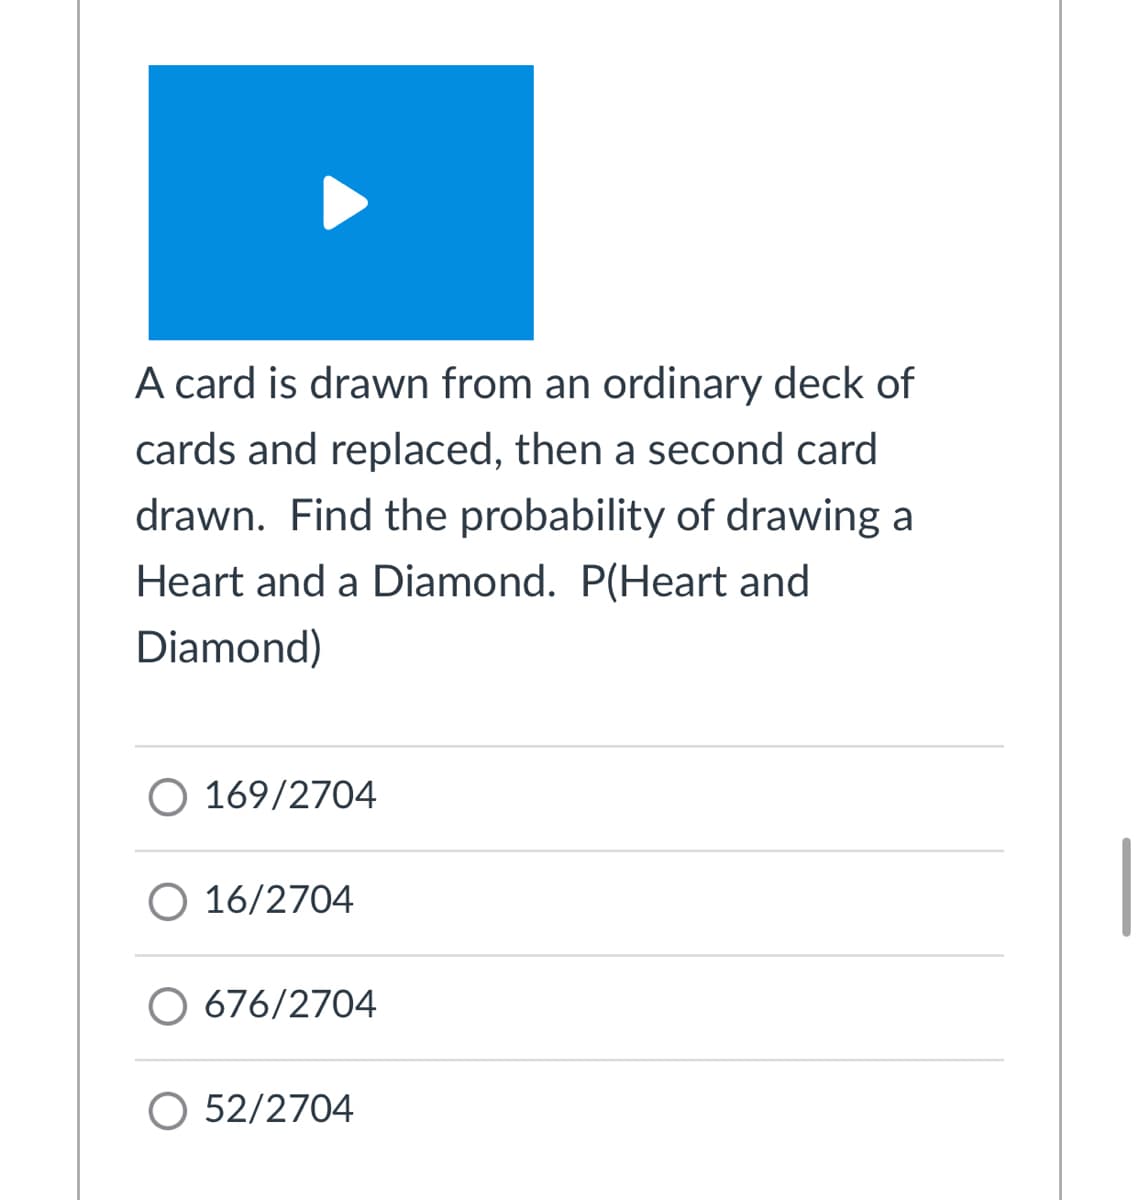 A card is drawn from an ordinary deck of
cards and replaced, then a second card
drawn. Find the probability of drawing a
Heart and a Diamond. P(Heart and
Diamond)
169/2704
O 16/2704
O 676/2704
O 52/2704
